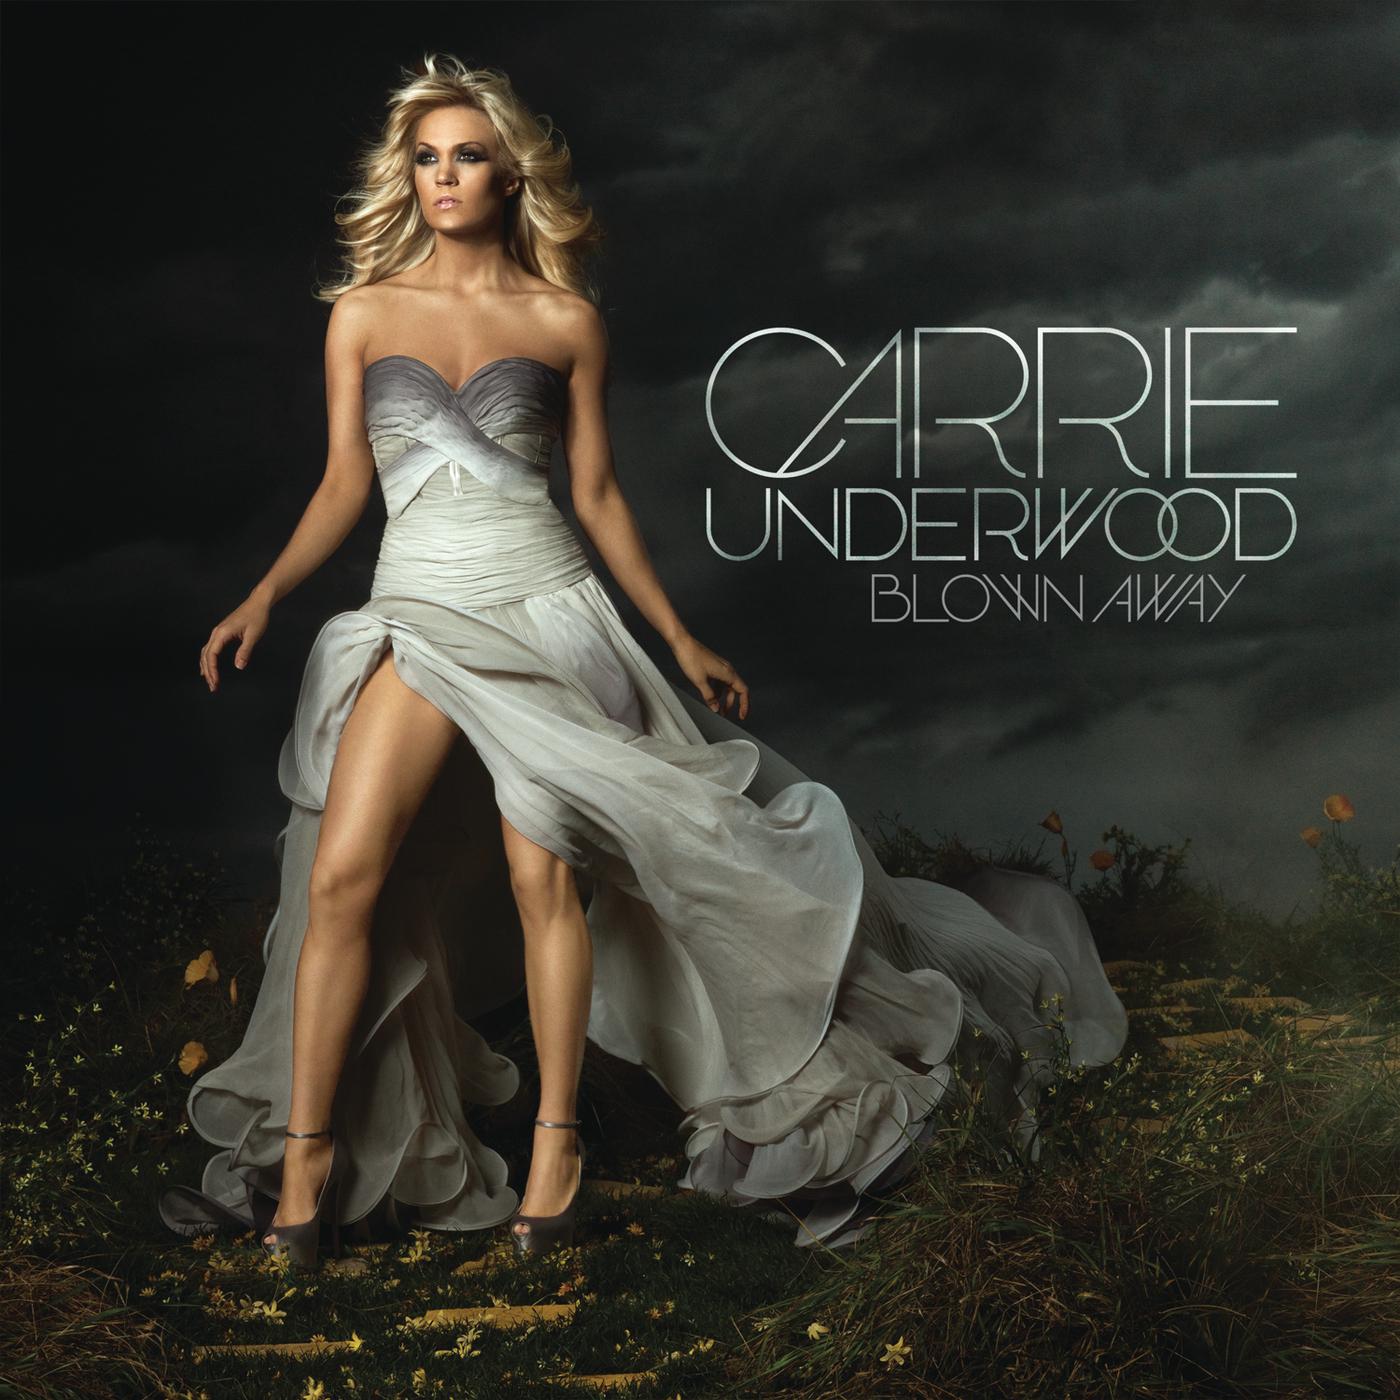 Carrie Underwood - Do You Think About Me